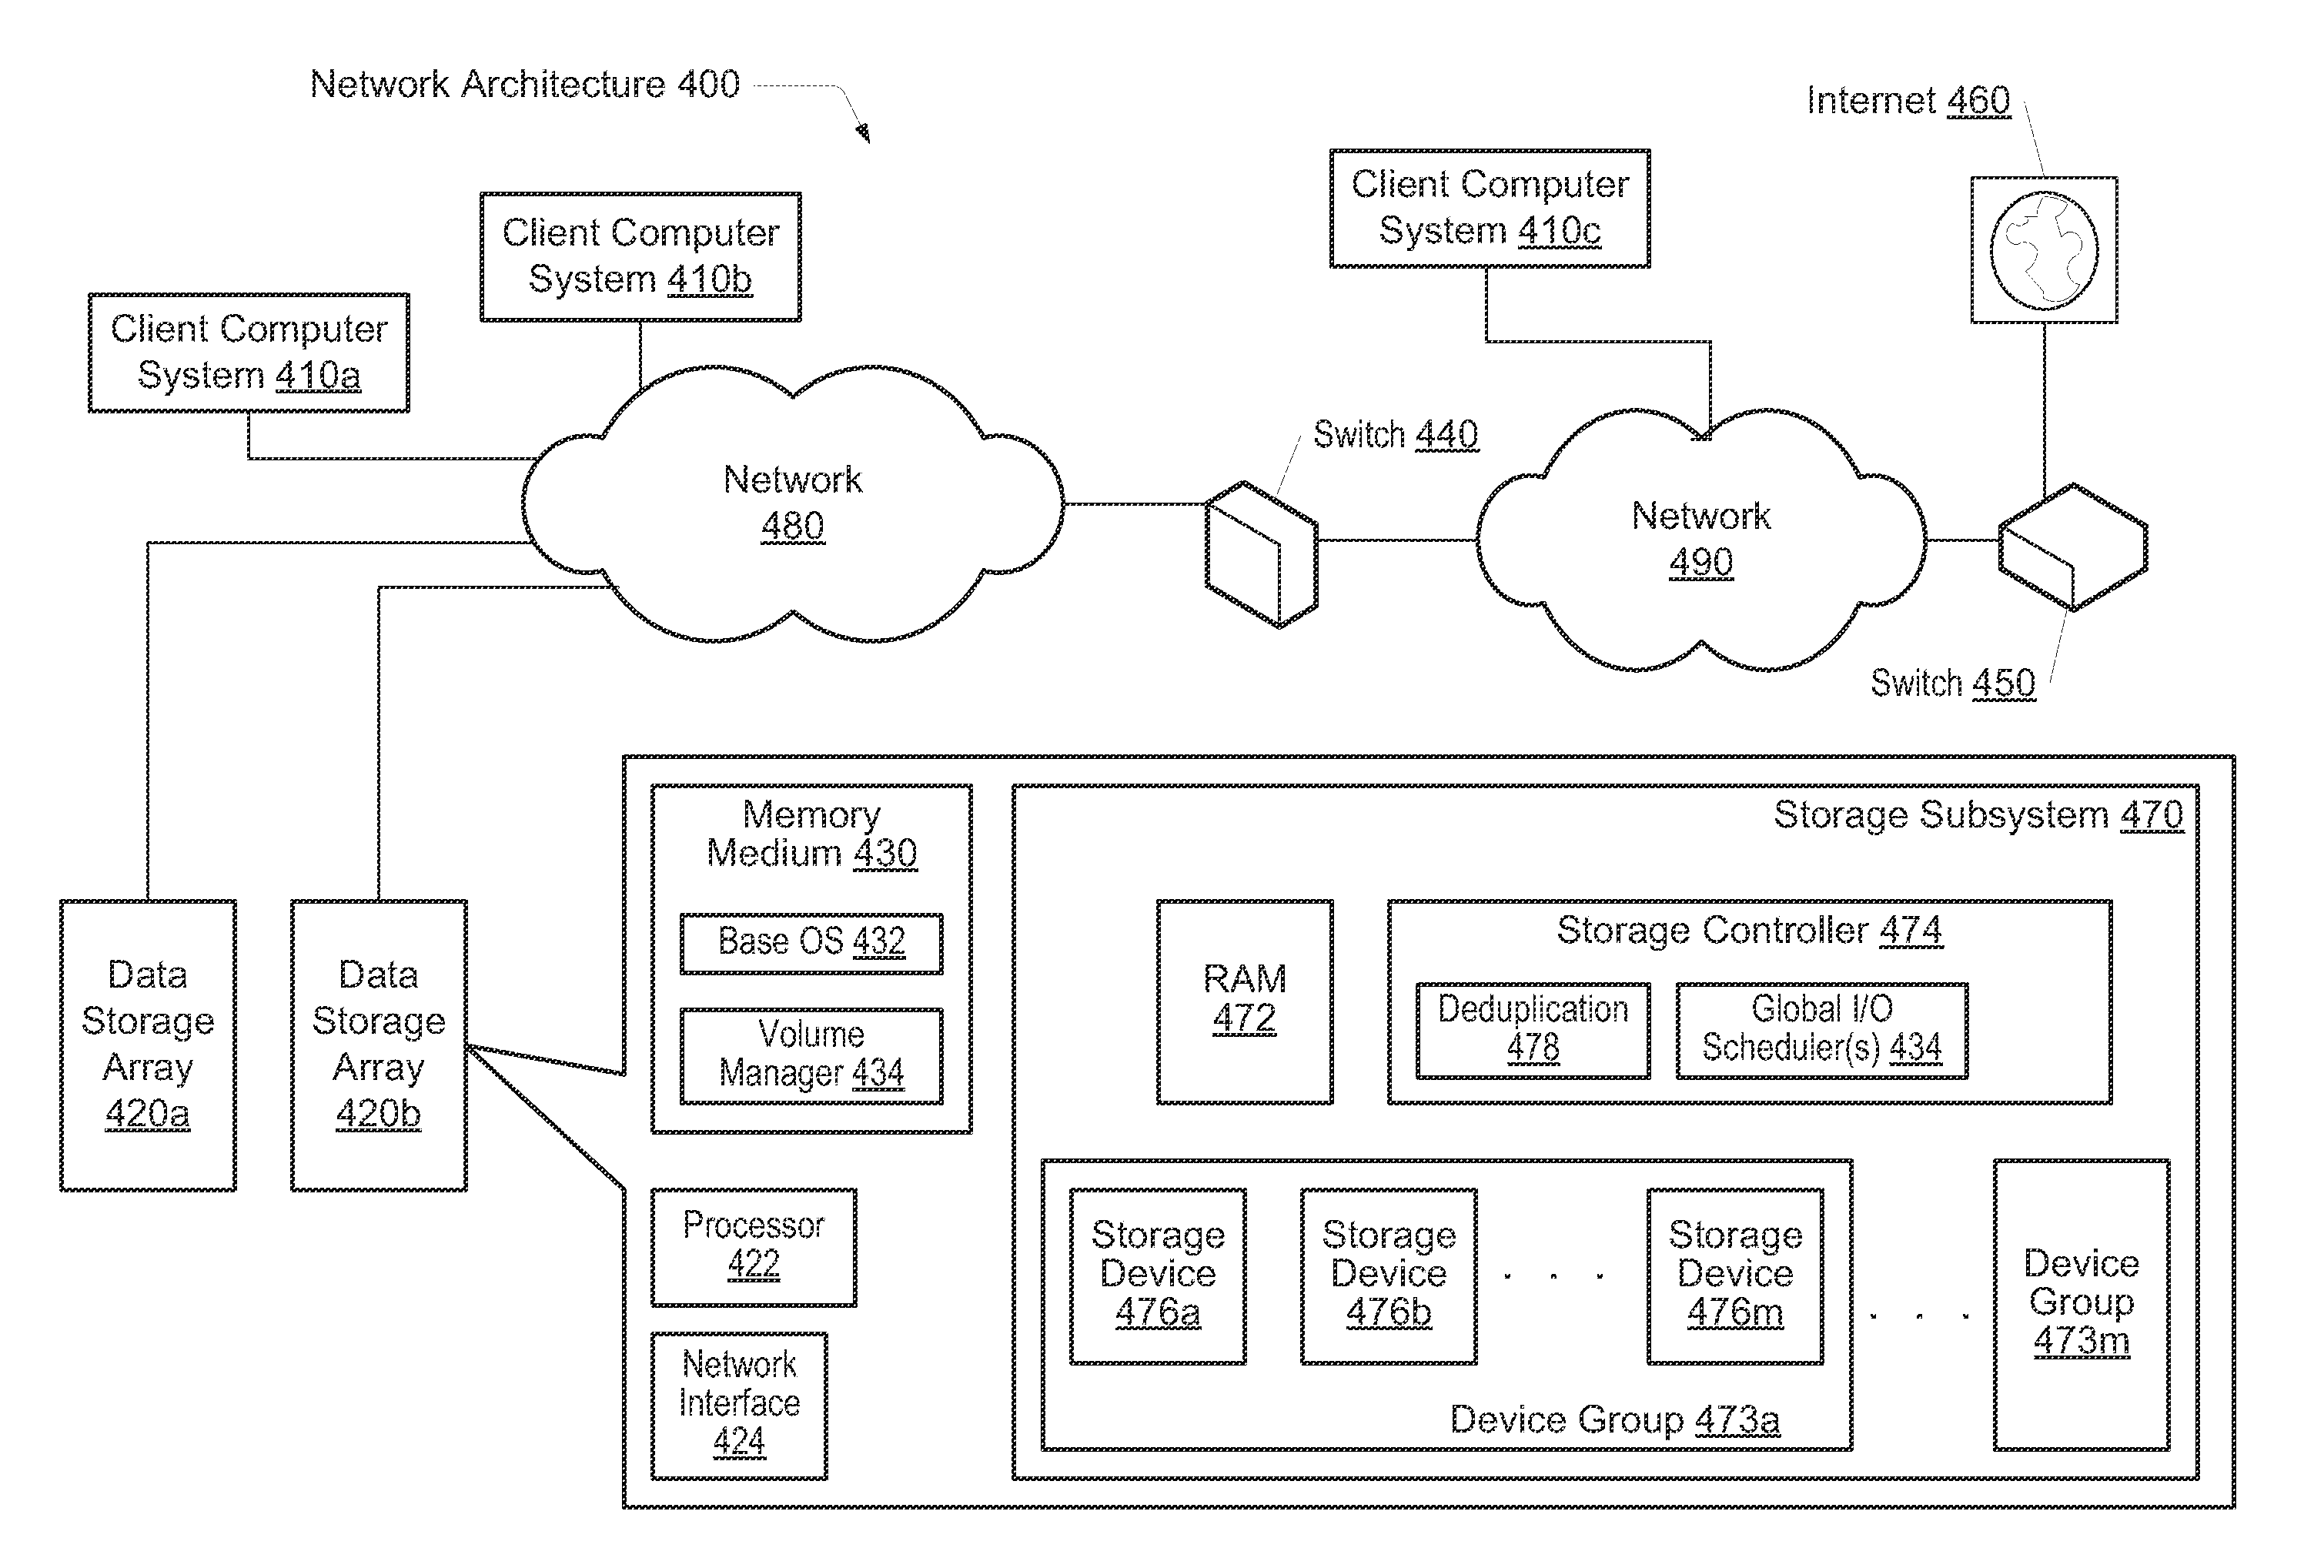 Fractal layout of data blocks across multiple devices